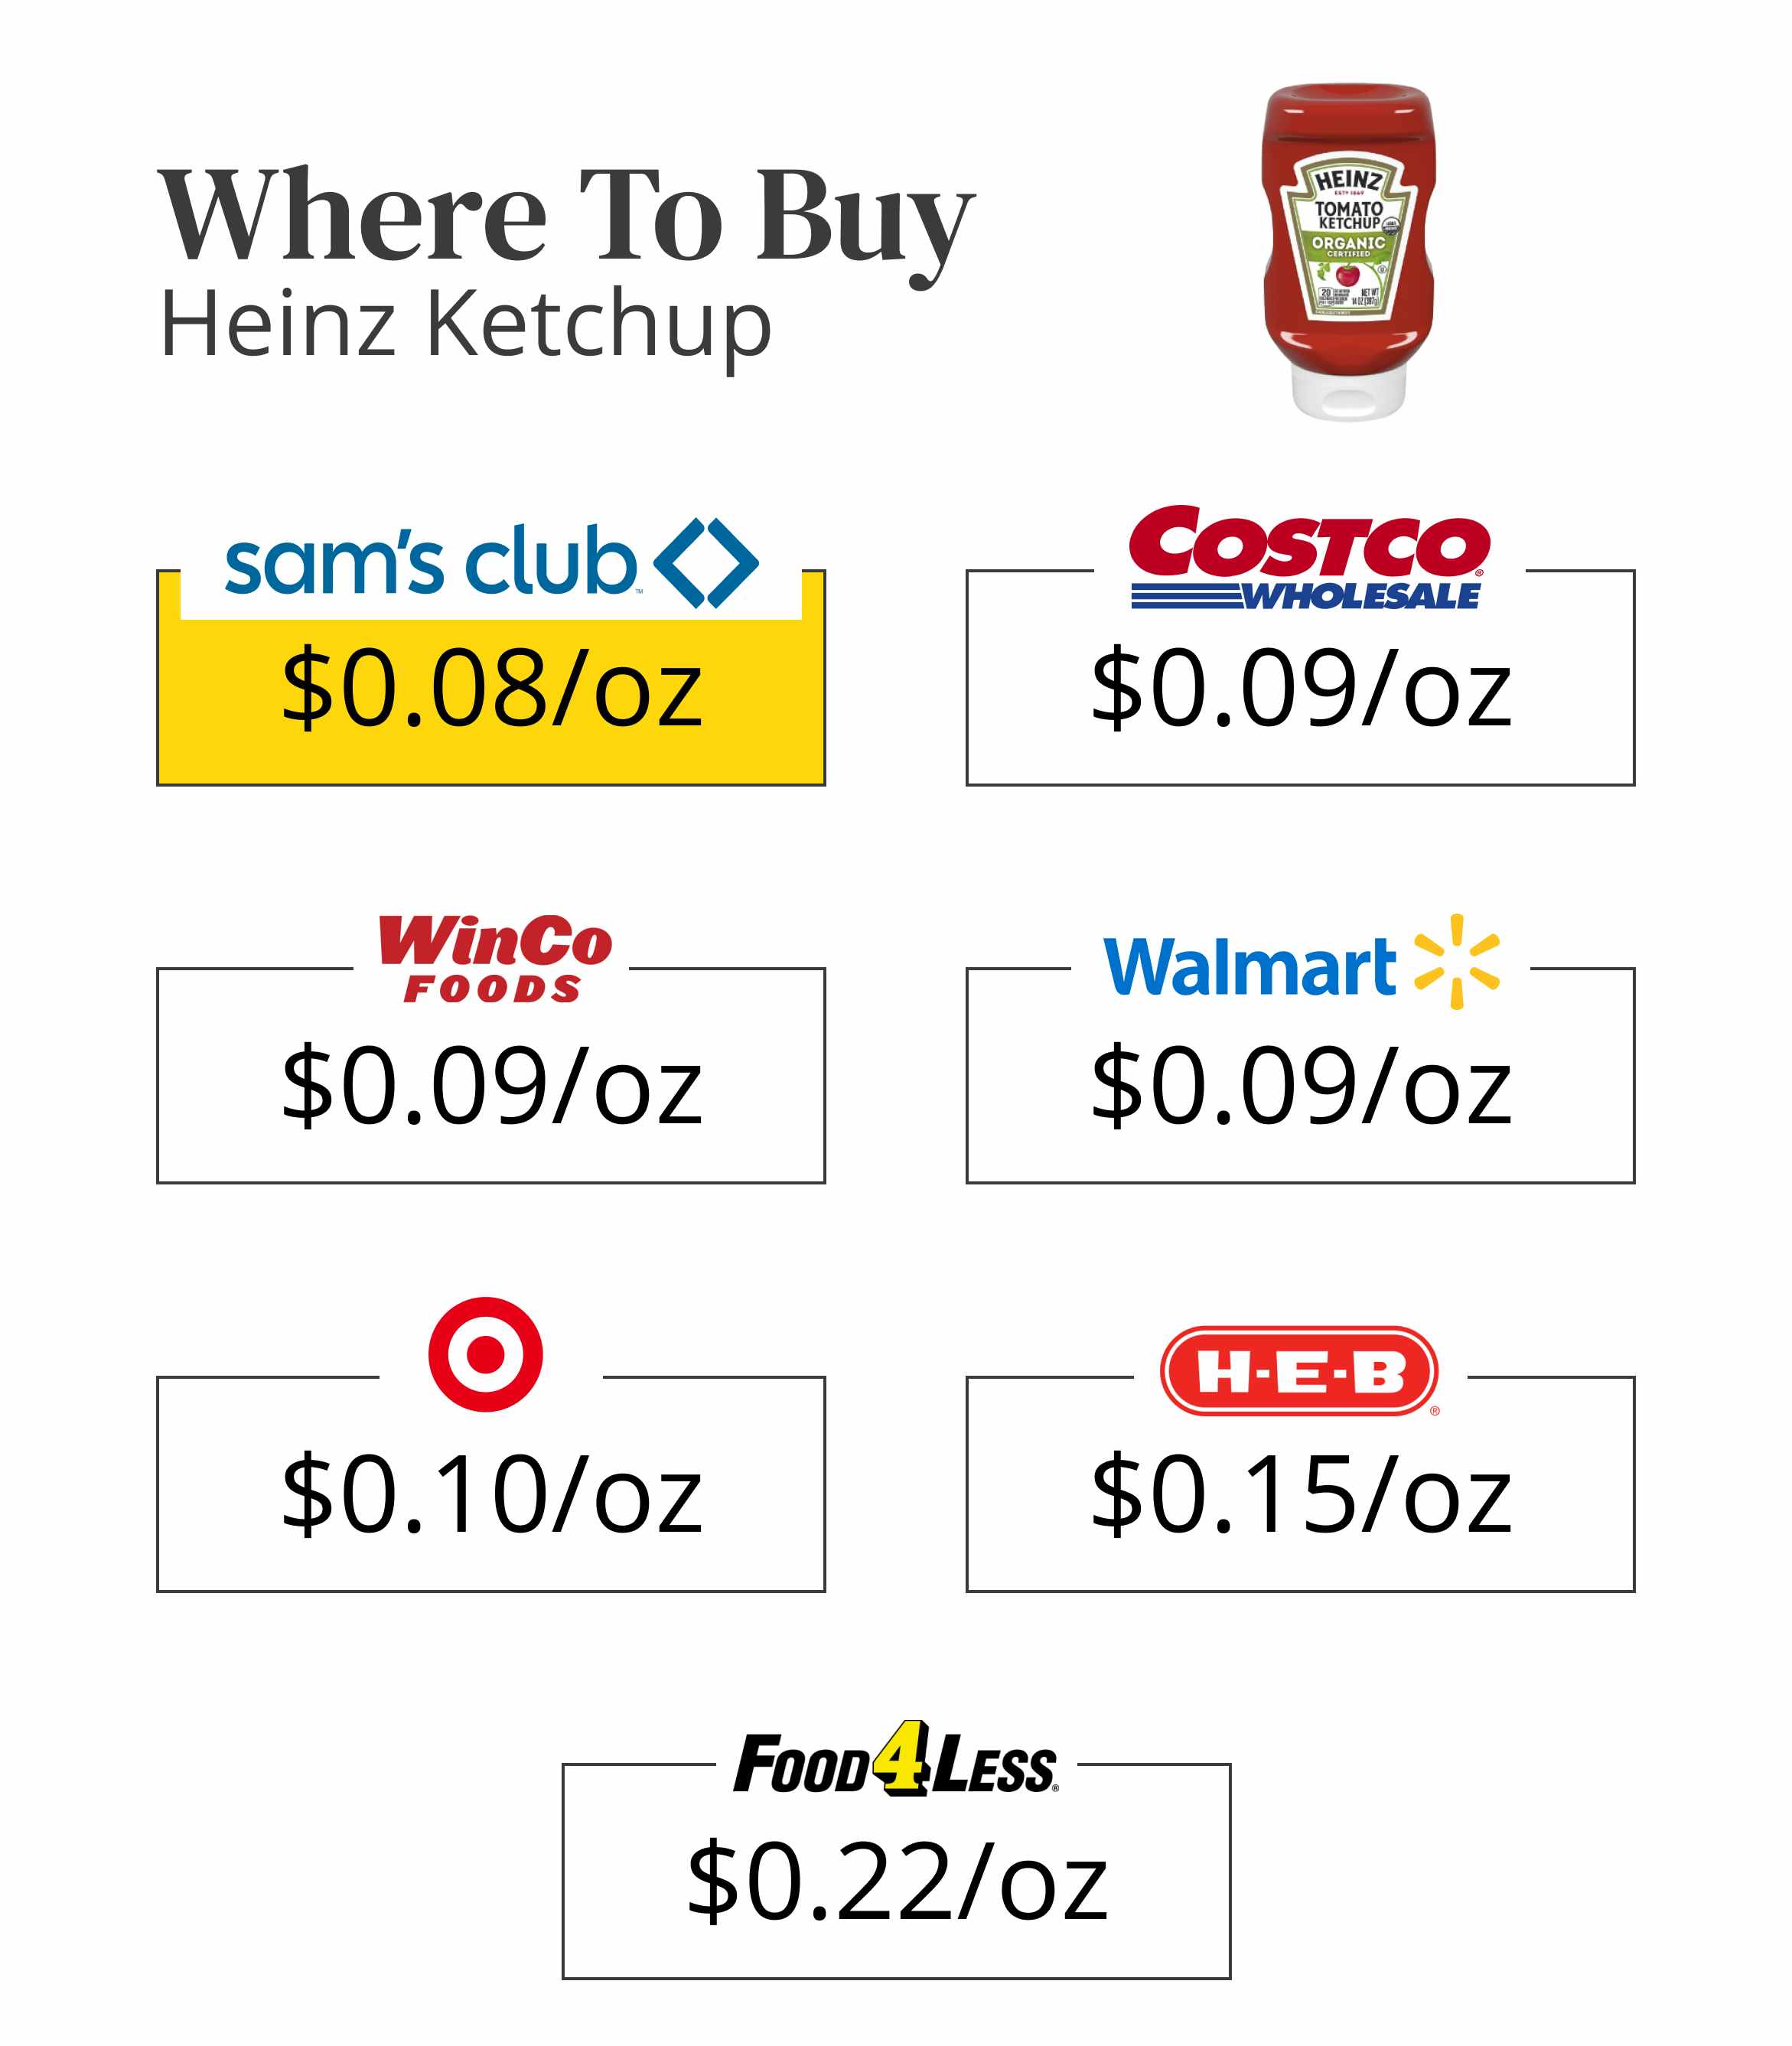 Where to buy heinz ketchup 